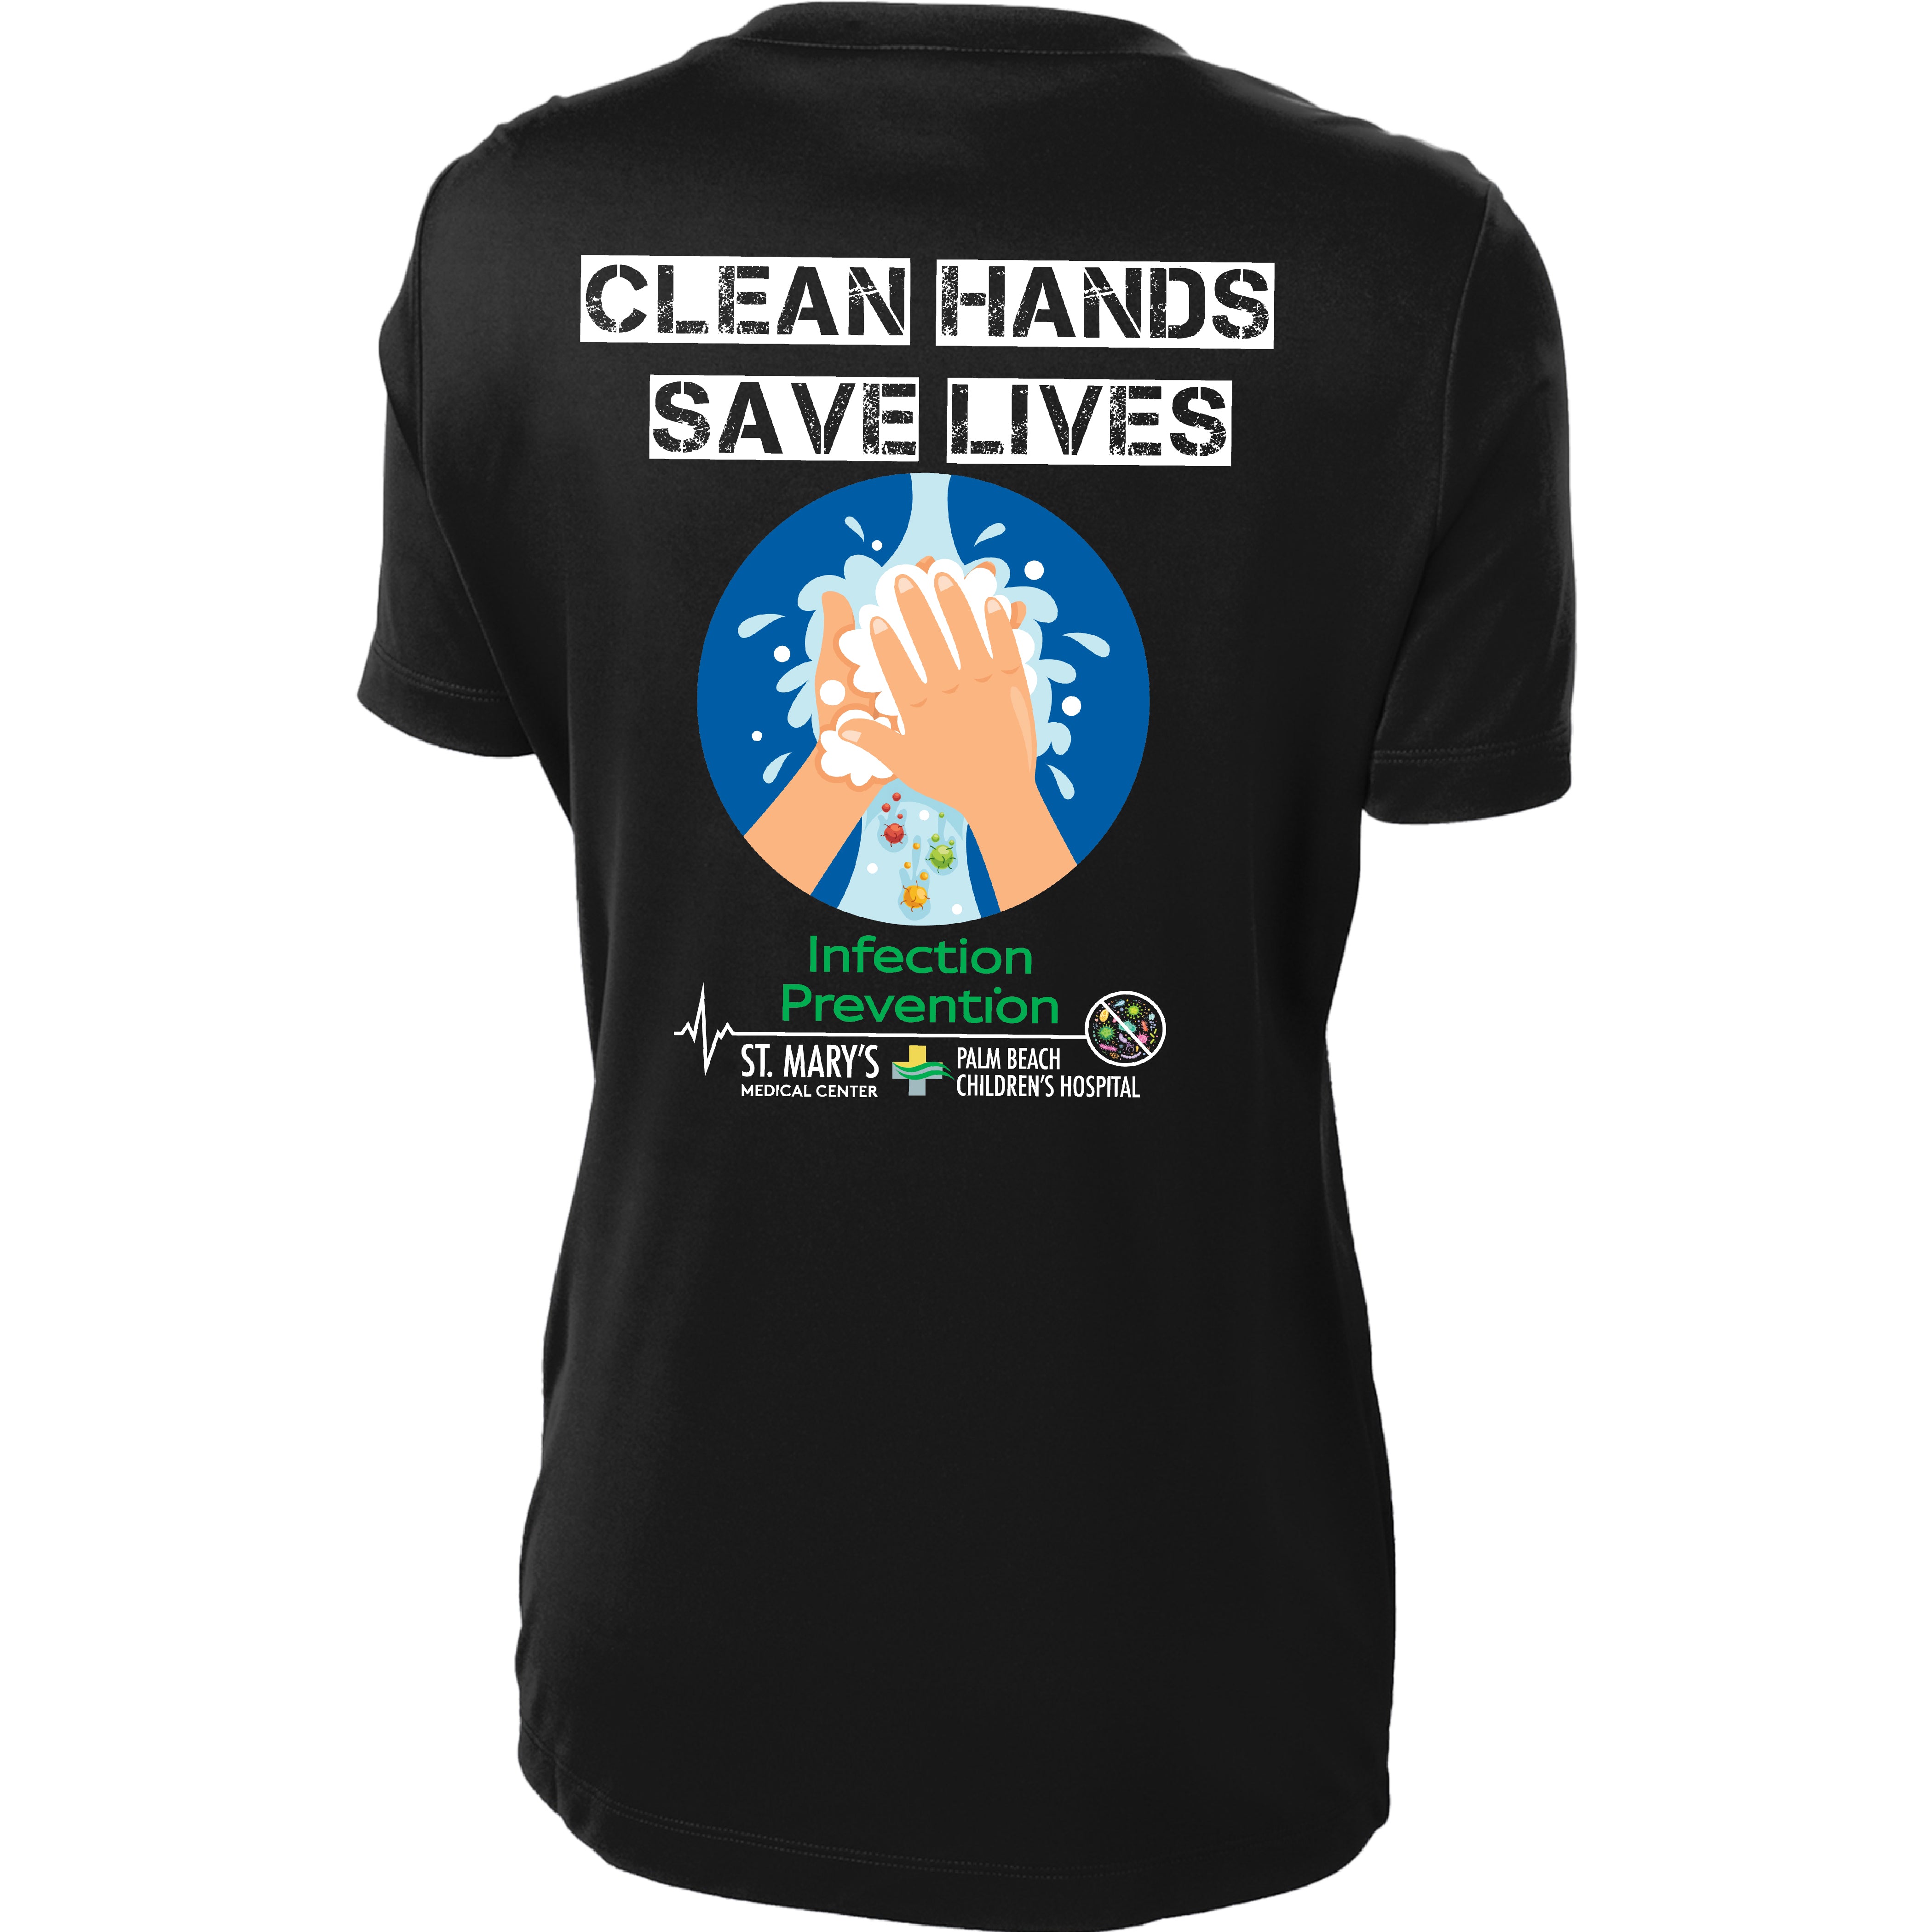 St. Mary's Hospital - Clean Hands Save Lives PERFORMANCE V-Neck